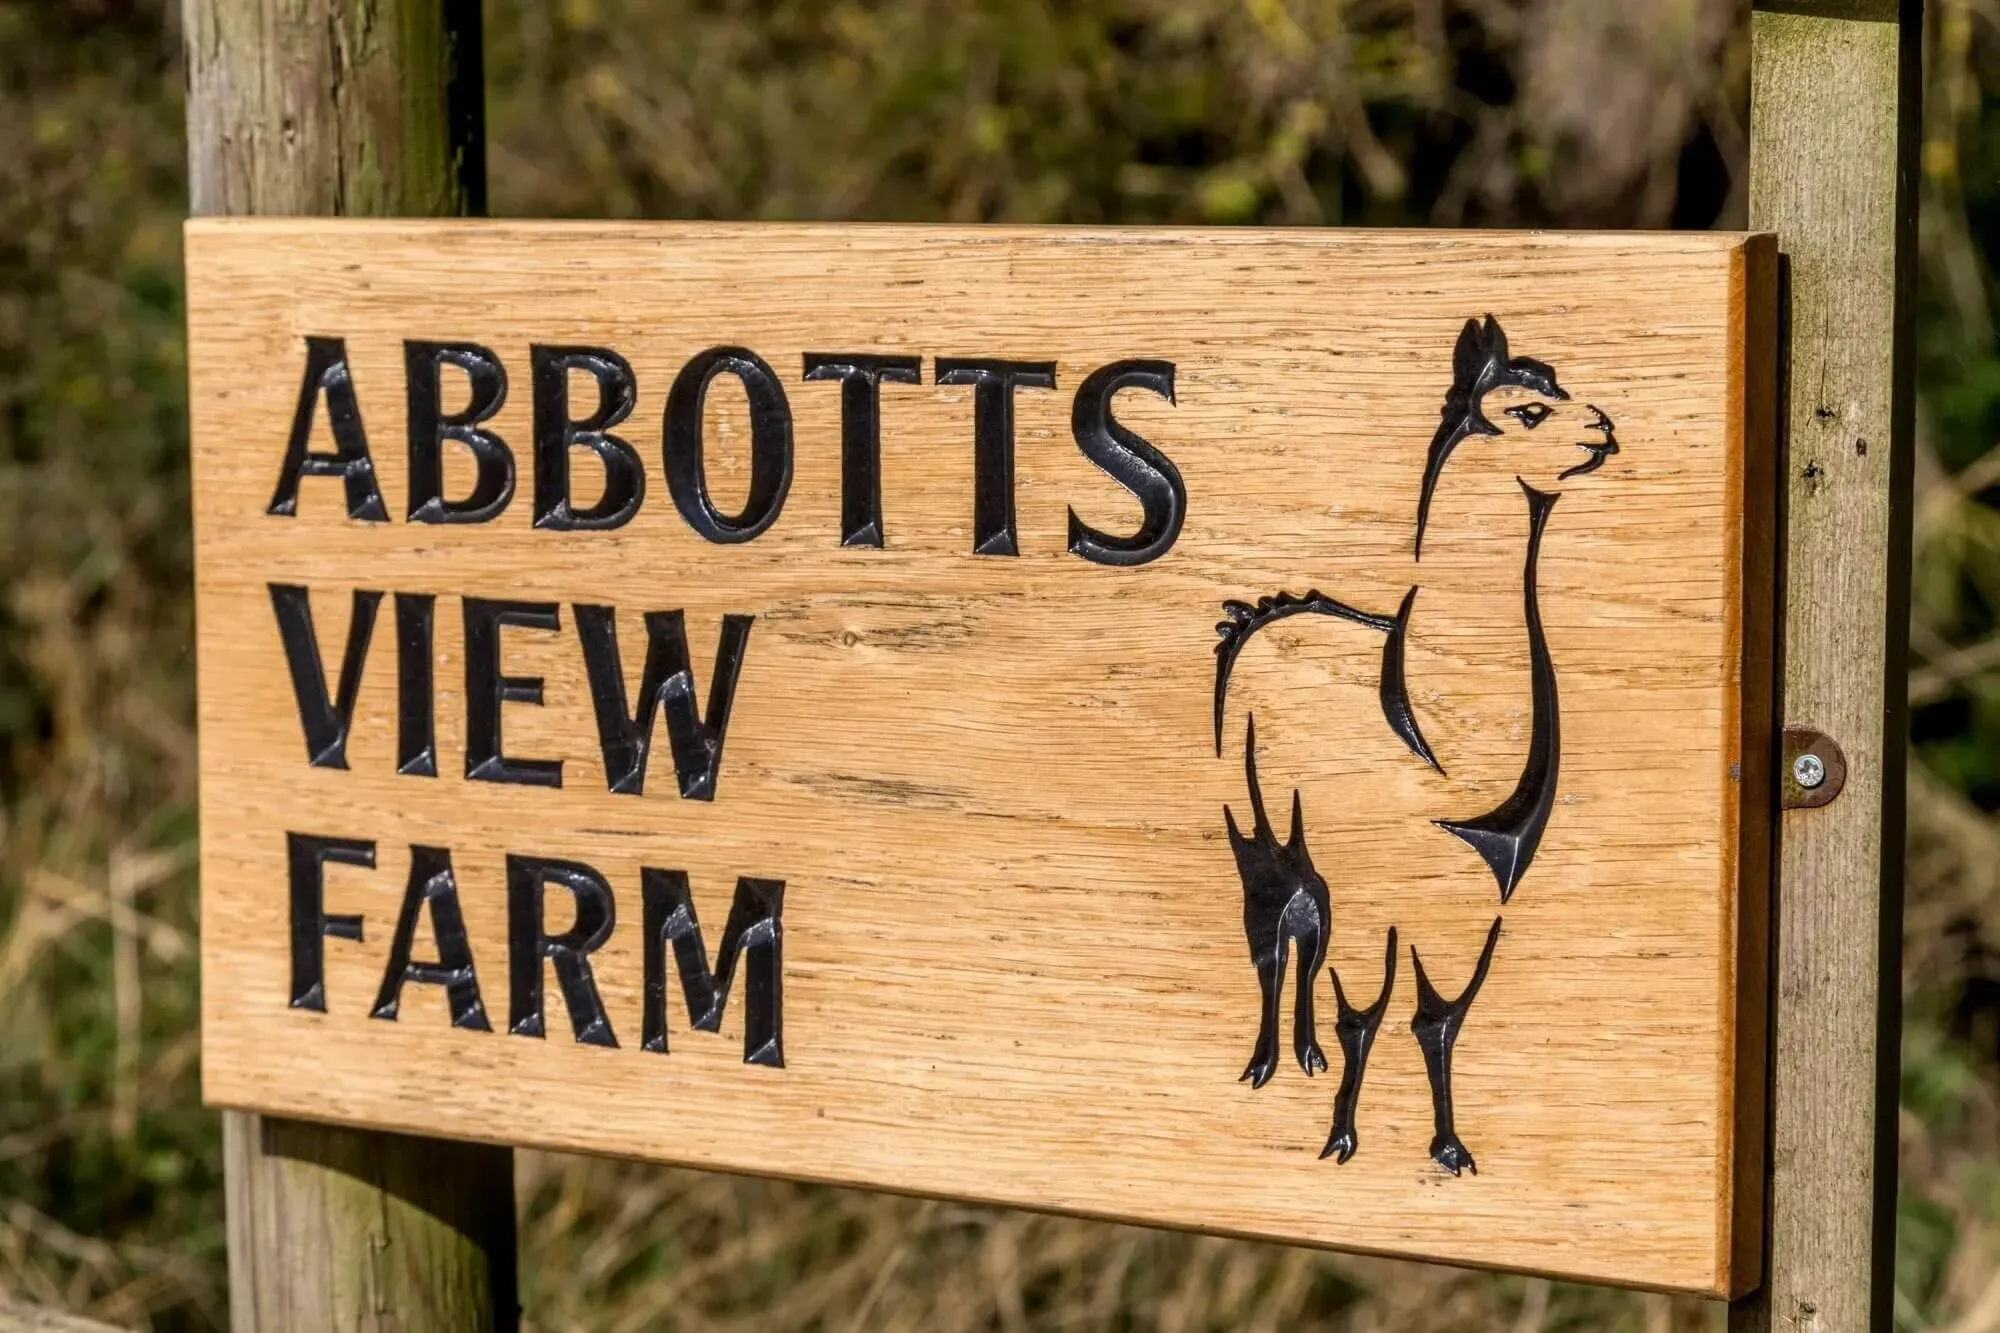 A wooden sign with 'Abbotts View Farm' and a picture of an alpaca on it.